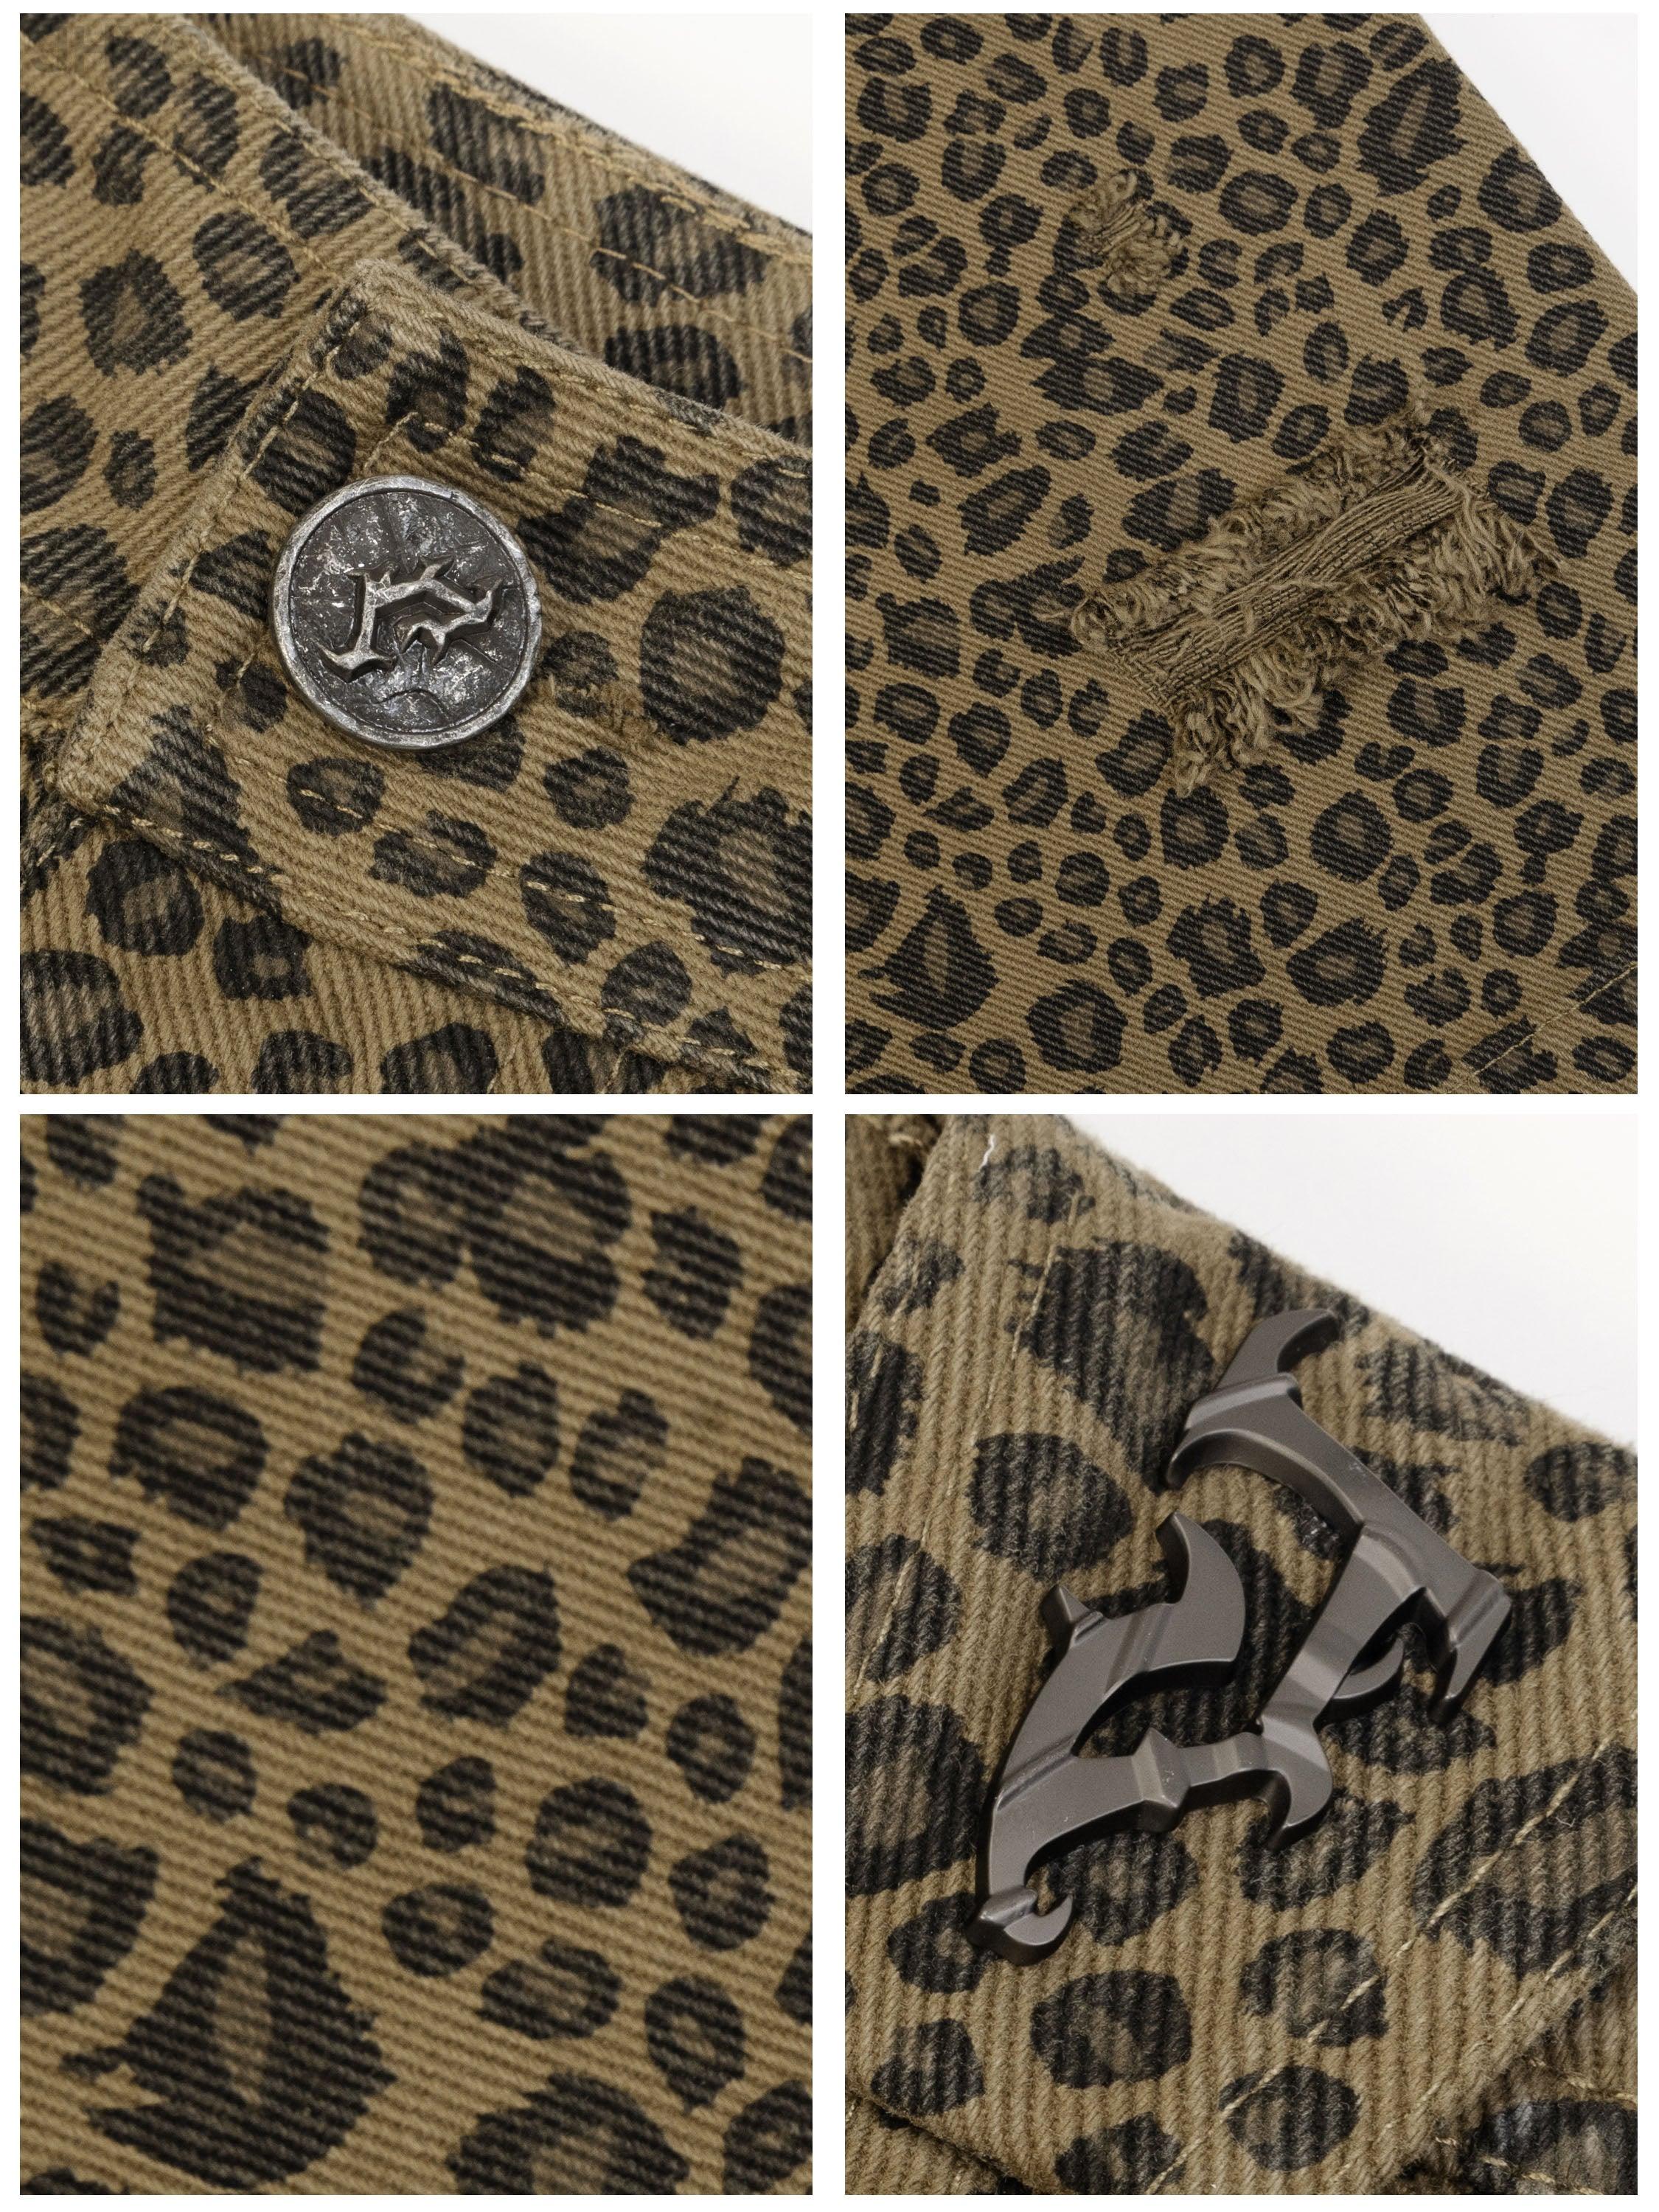 Leopard Print Baggy Shorts for Work - chiclara